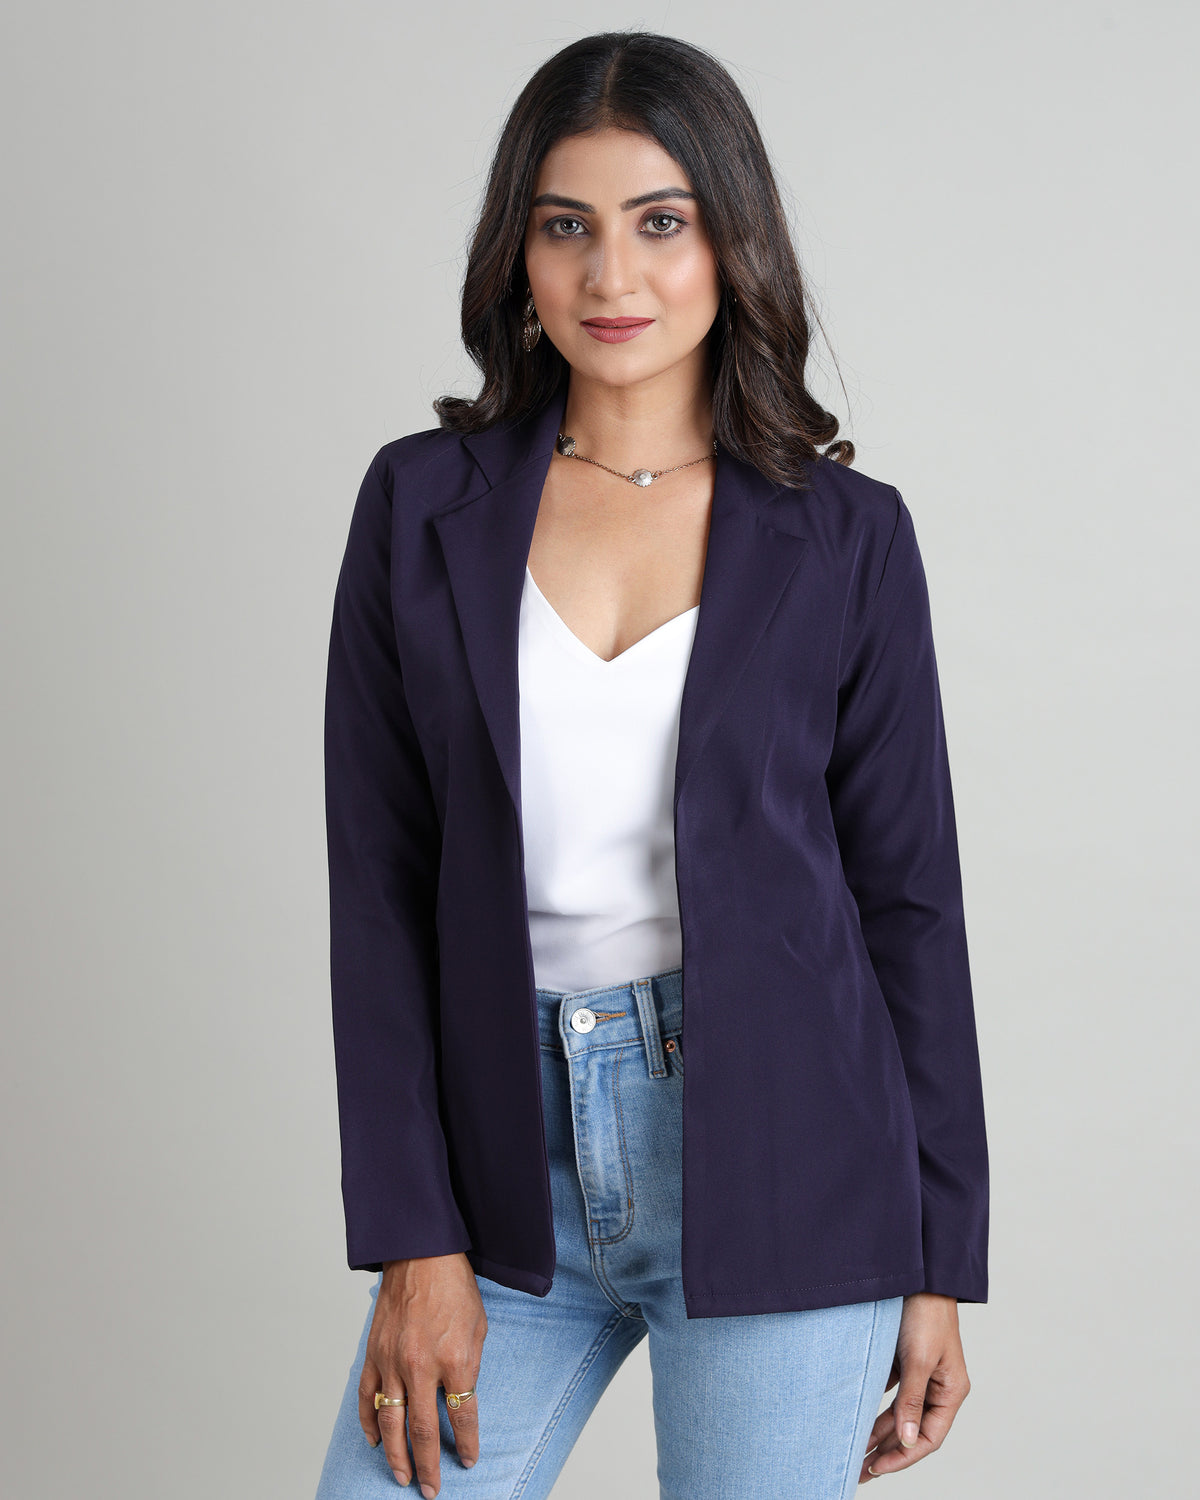 The All-Season Essential: Navy Blue Jacket for Women